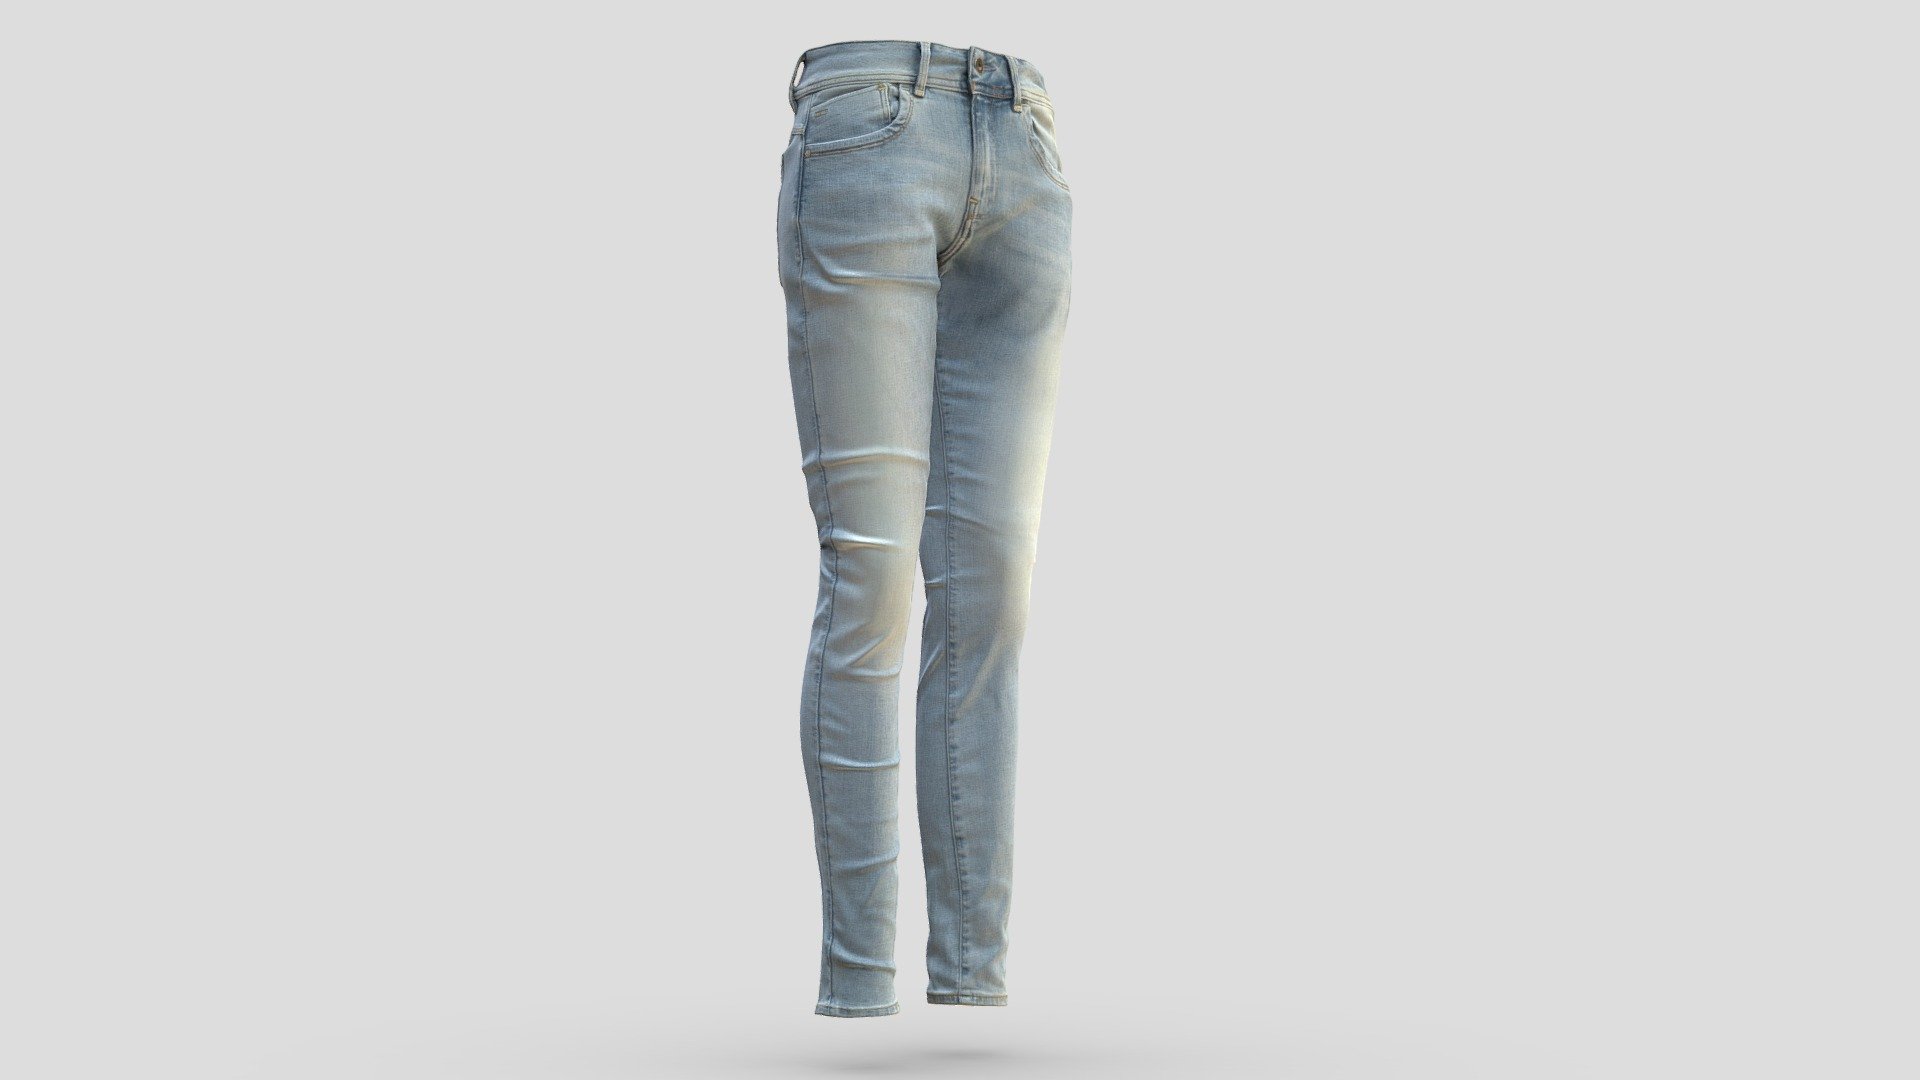 3D scan of a pair of jeans - SF_Jeans - 3D model by Th3rd B.V. (@th3rdbv) 3d model